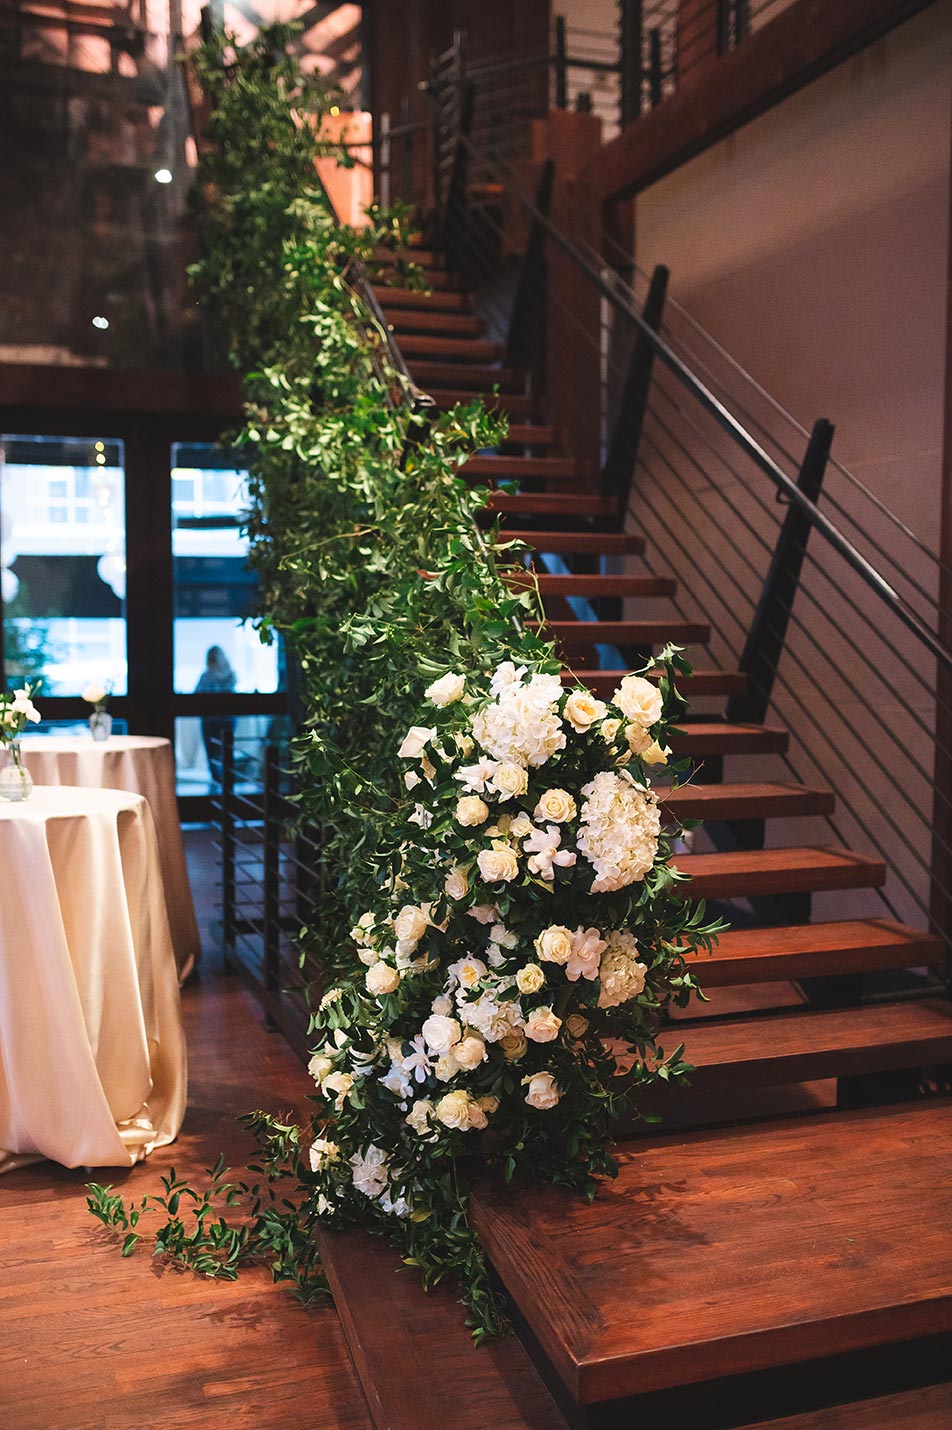 Staircase floral display with greenery and white roses